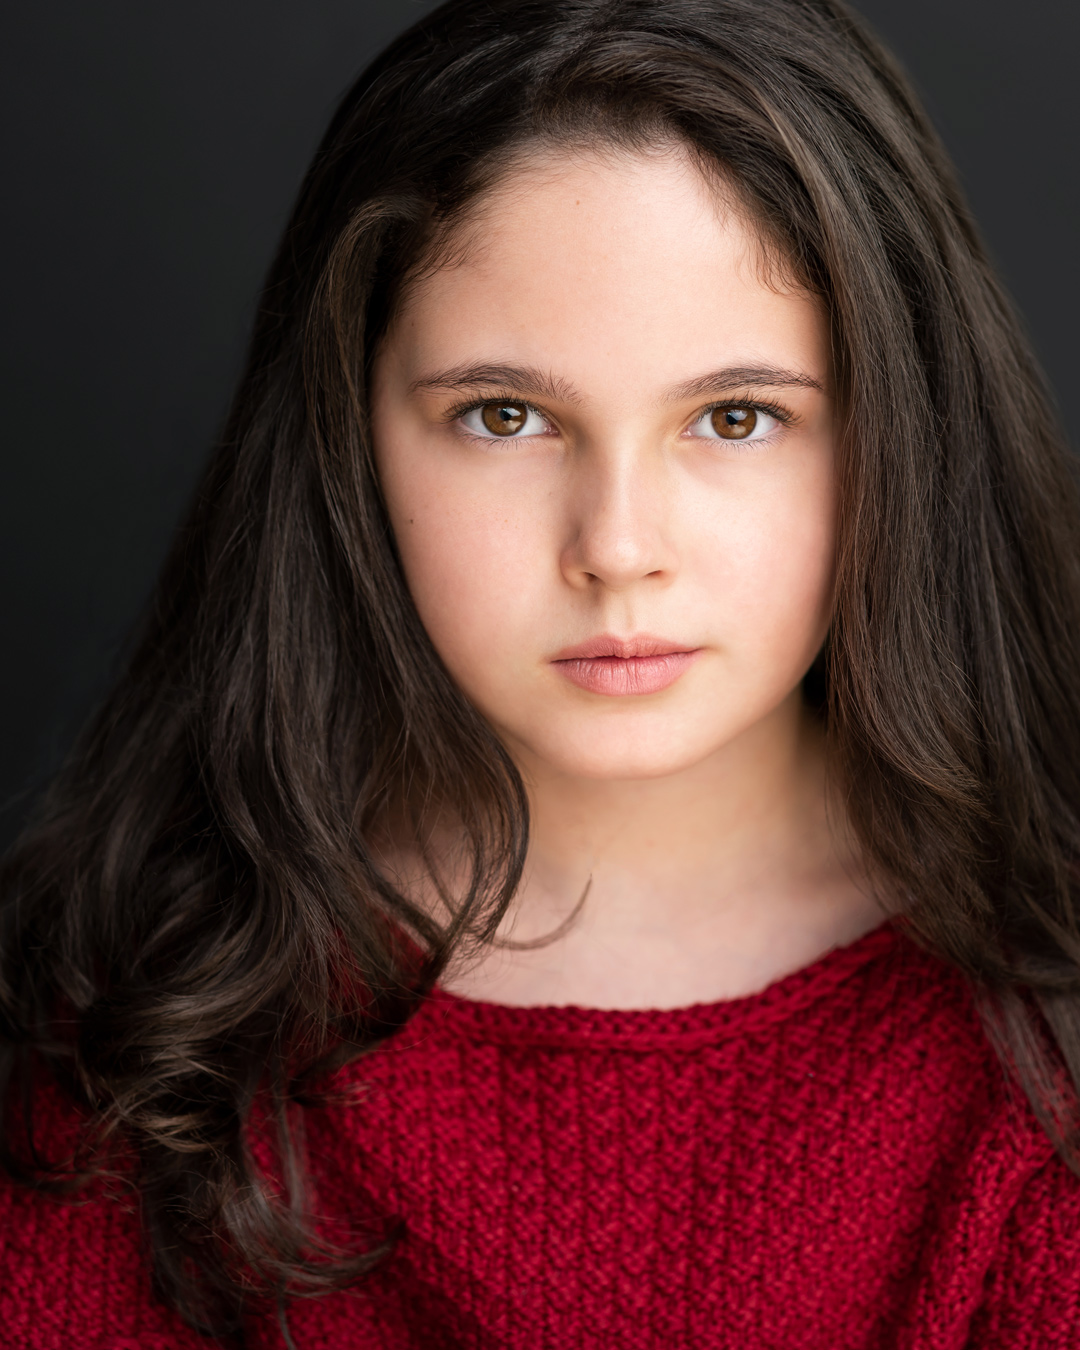 Another life child actor Lina Renna professional acting headshot